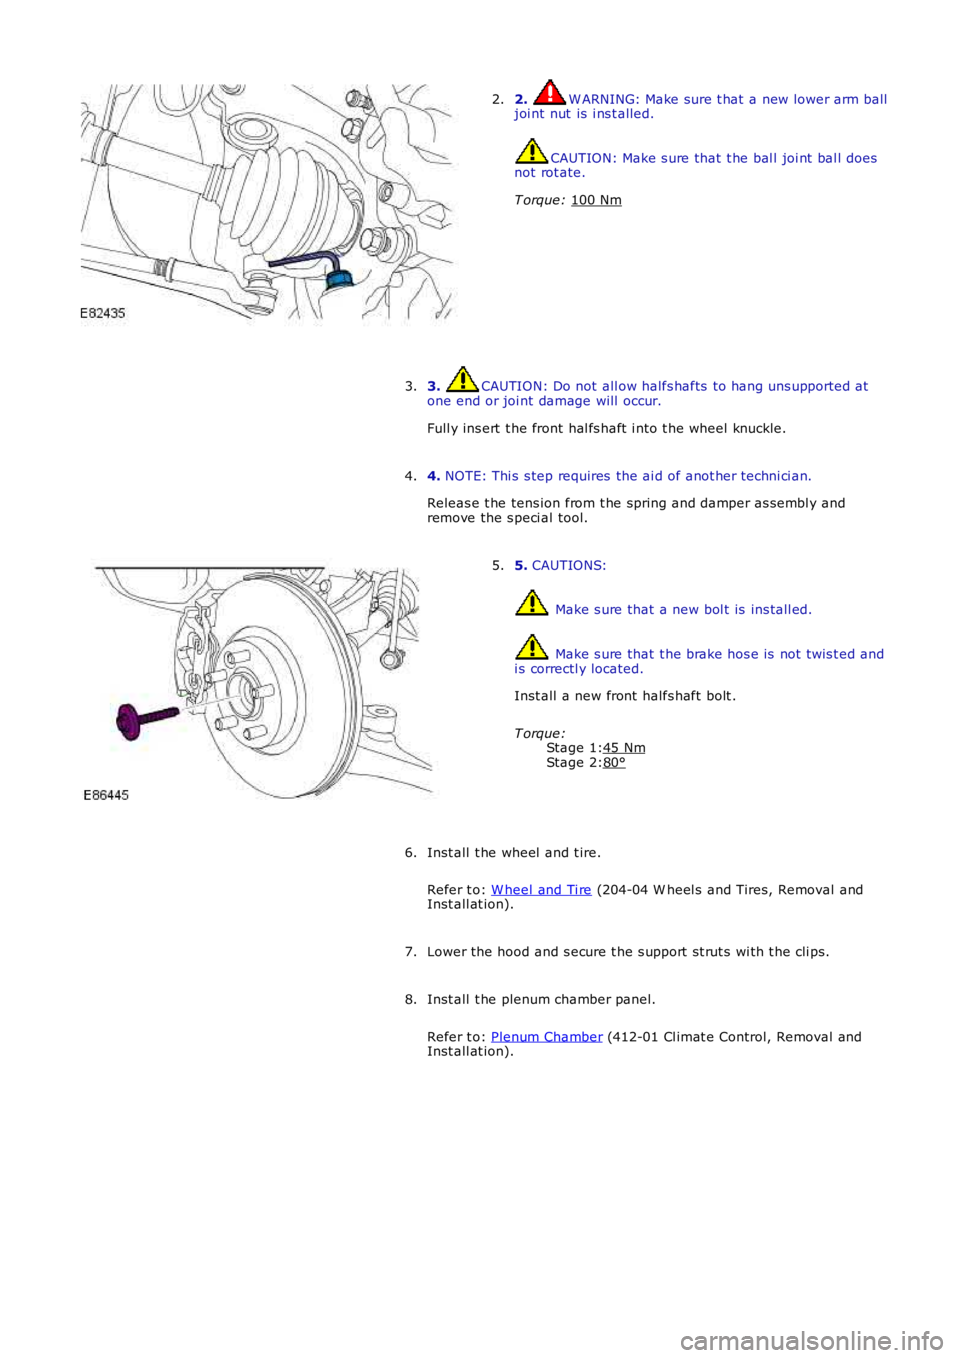 LAND ROVER FRELANDER 2 2006  Repair Manual Stage 1:Stage 2:
2. W ARNING: Make sure t hat  a new lower arm balljoi nt nut  is  i ns t alled.
CAUTION: Make s ure that  t he bal l joi nt  bal l doesnot rot ate.
T orque: 100 Nm
2.
3. CAUTION: Do n